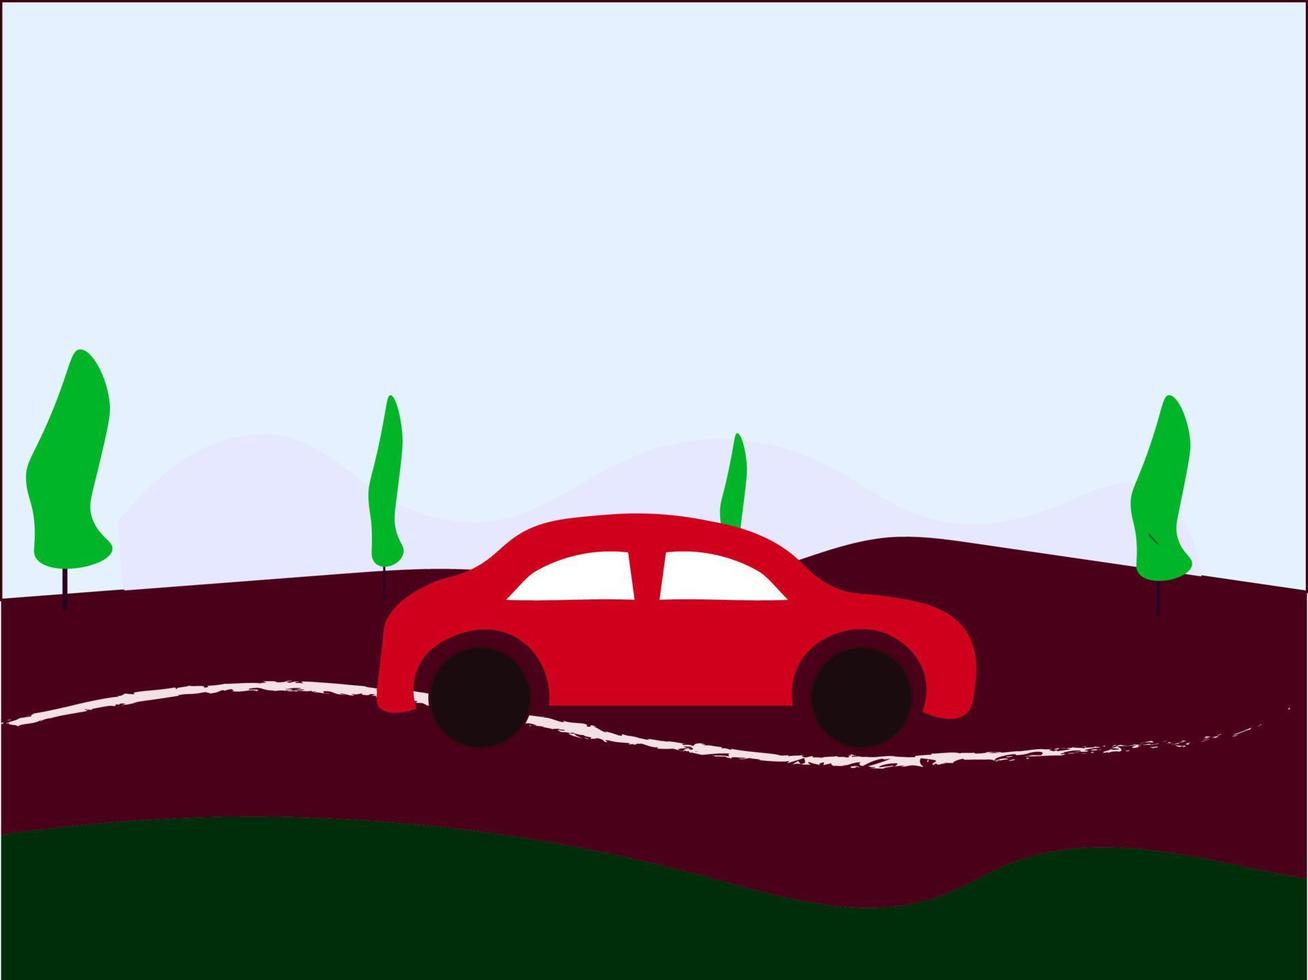 Car on the road, illustration, vector on white background.